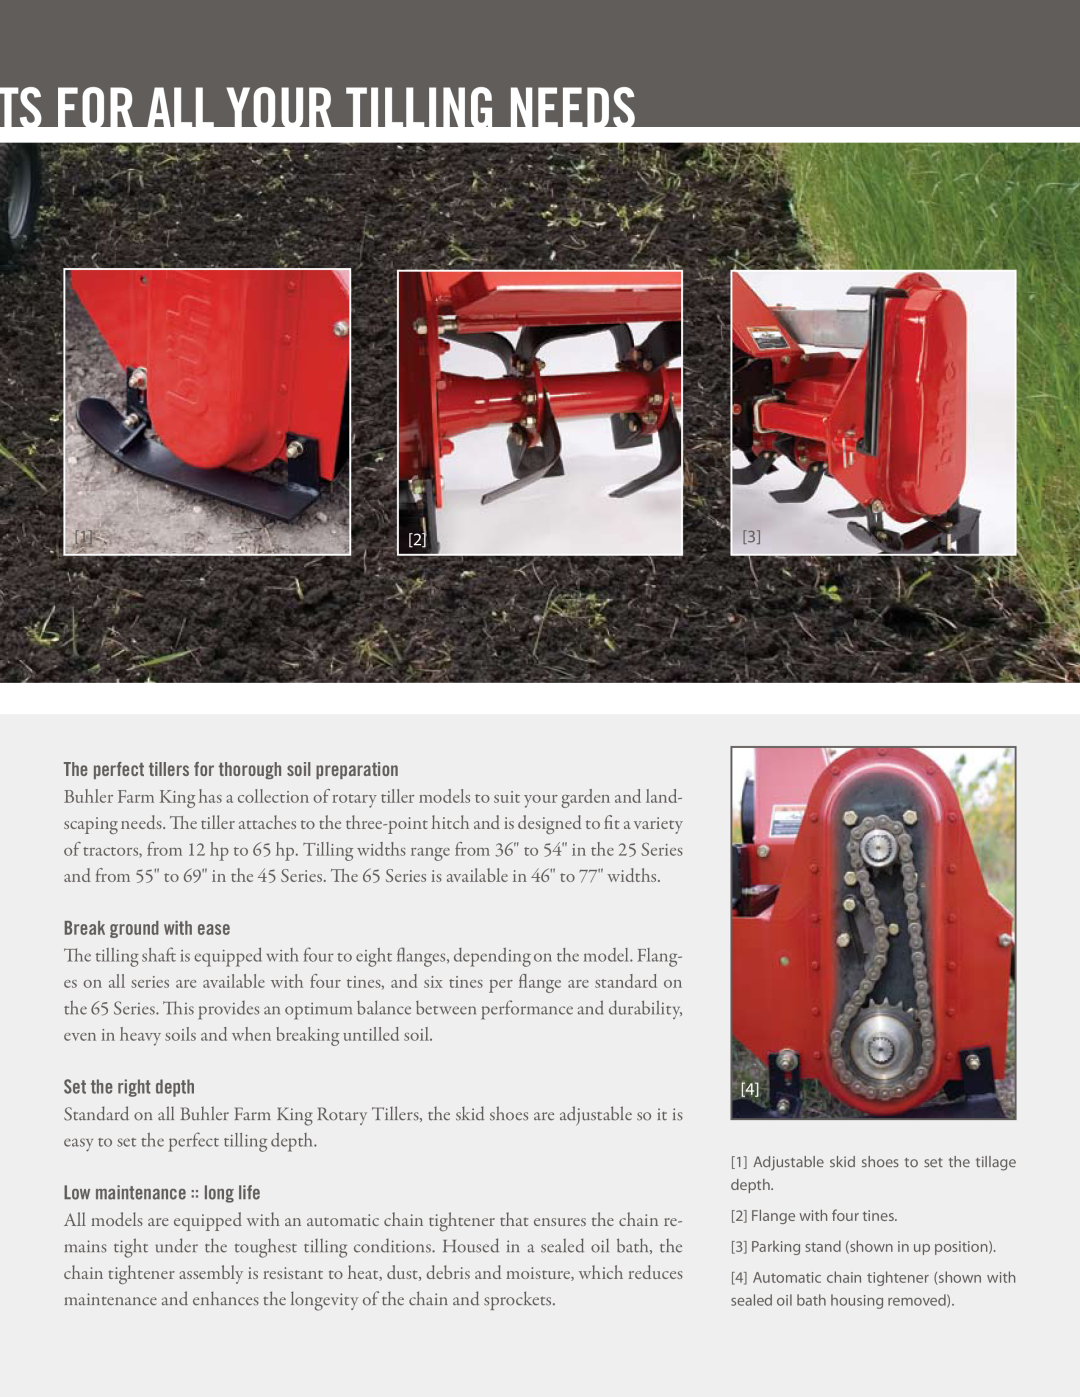 Buhler 24, 65 manual The perfect tillers for thorough soil preparation, Break ground with ease, Set the right depth 